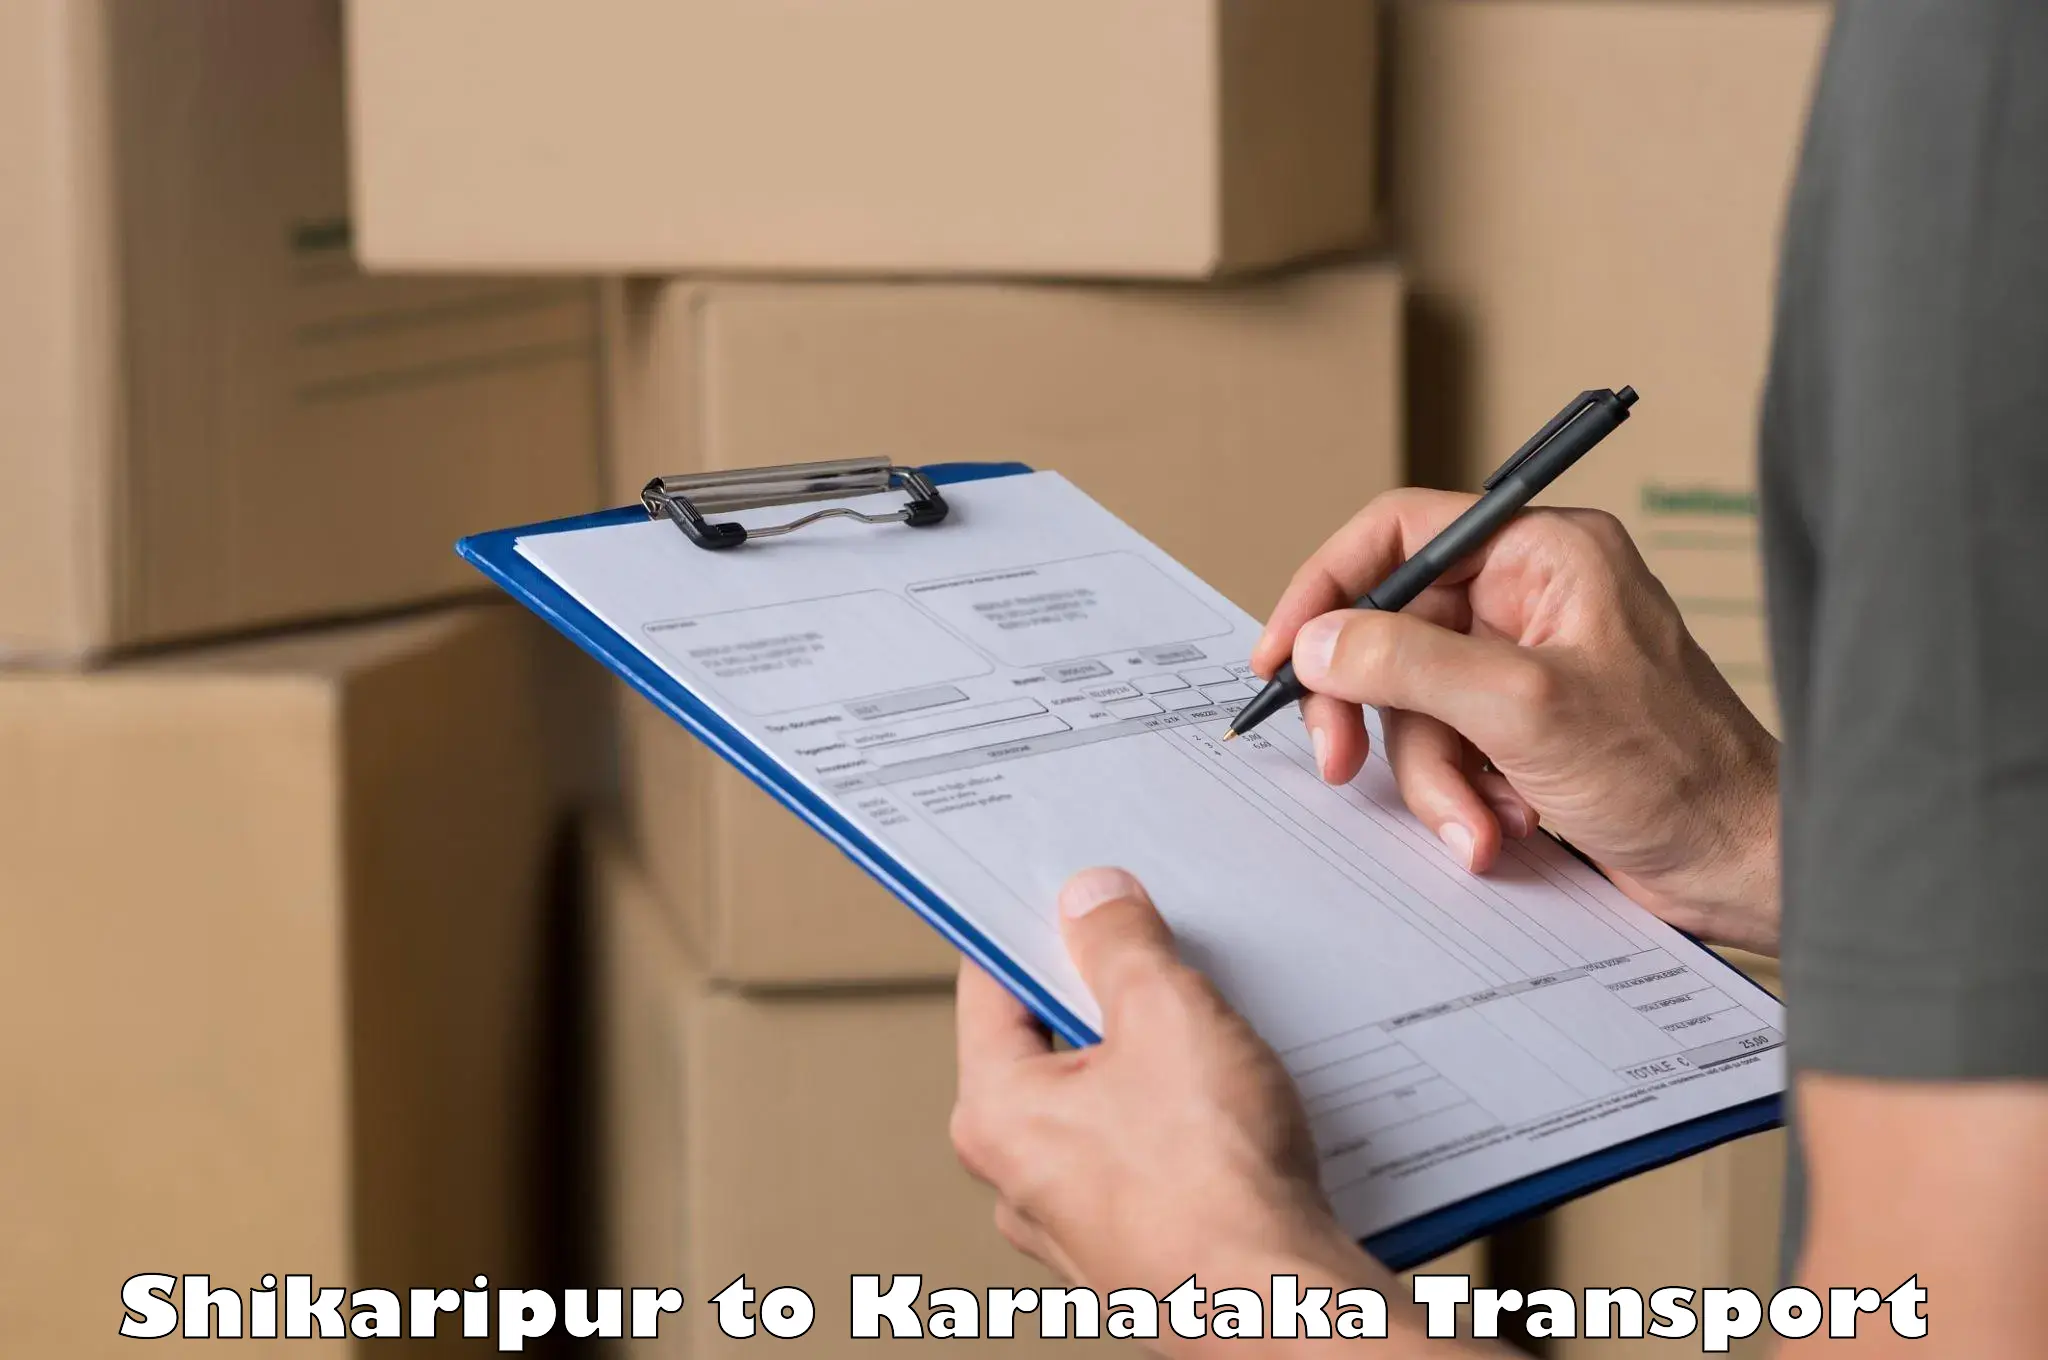 Truck transport companies in India in Shikaripur to Athani